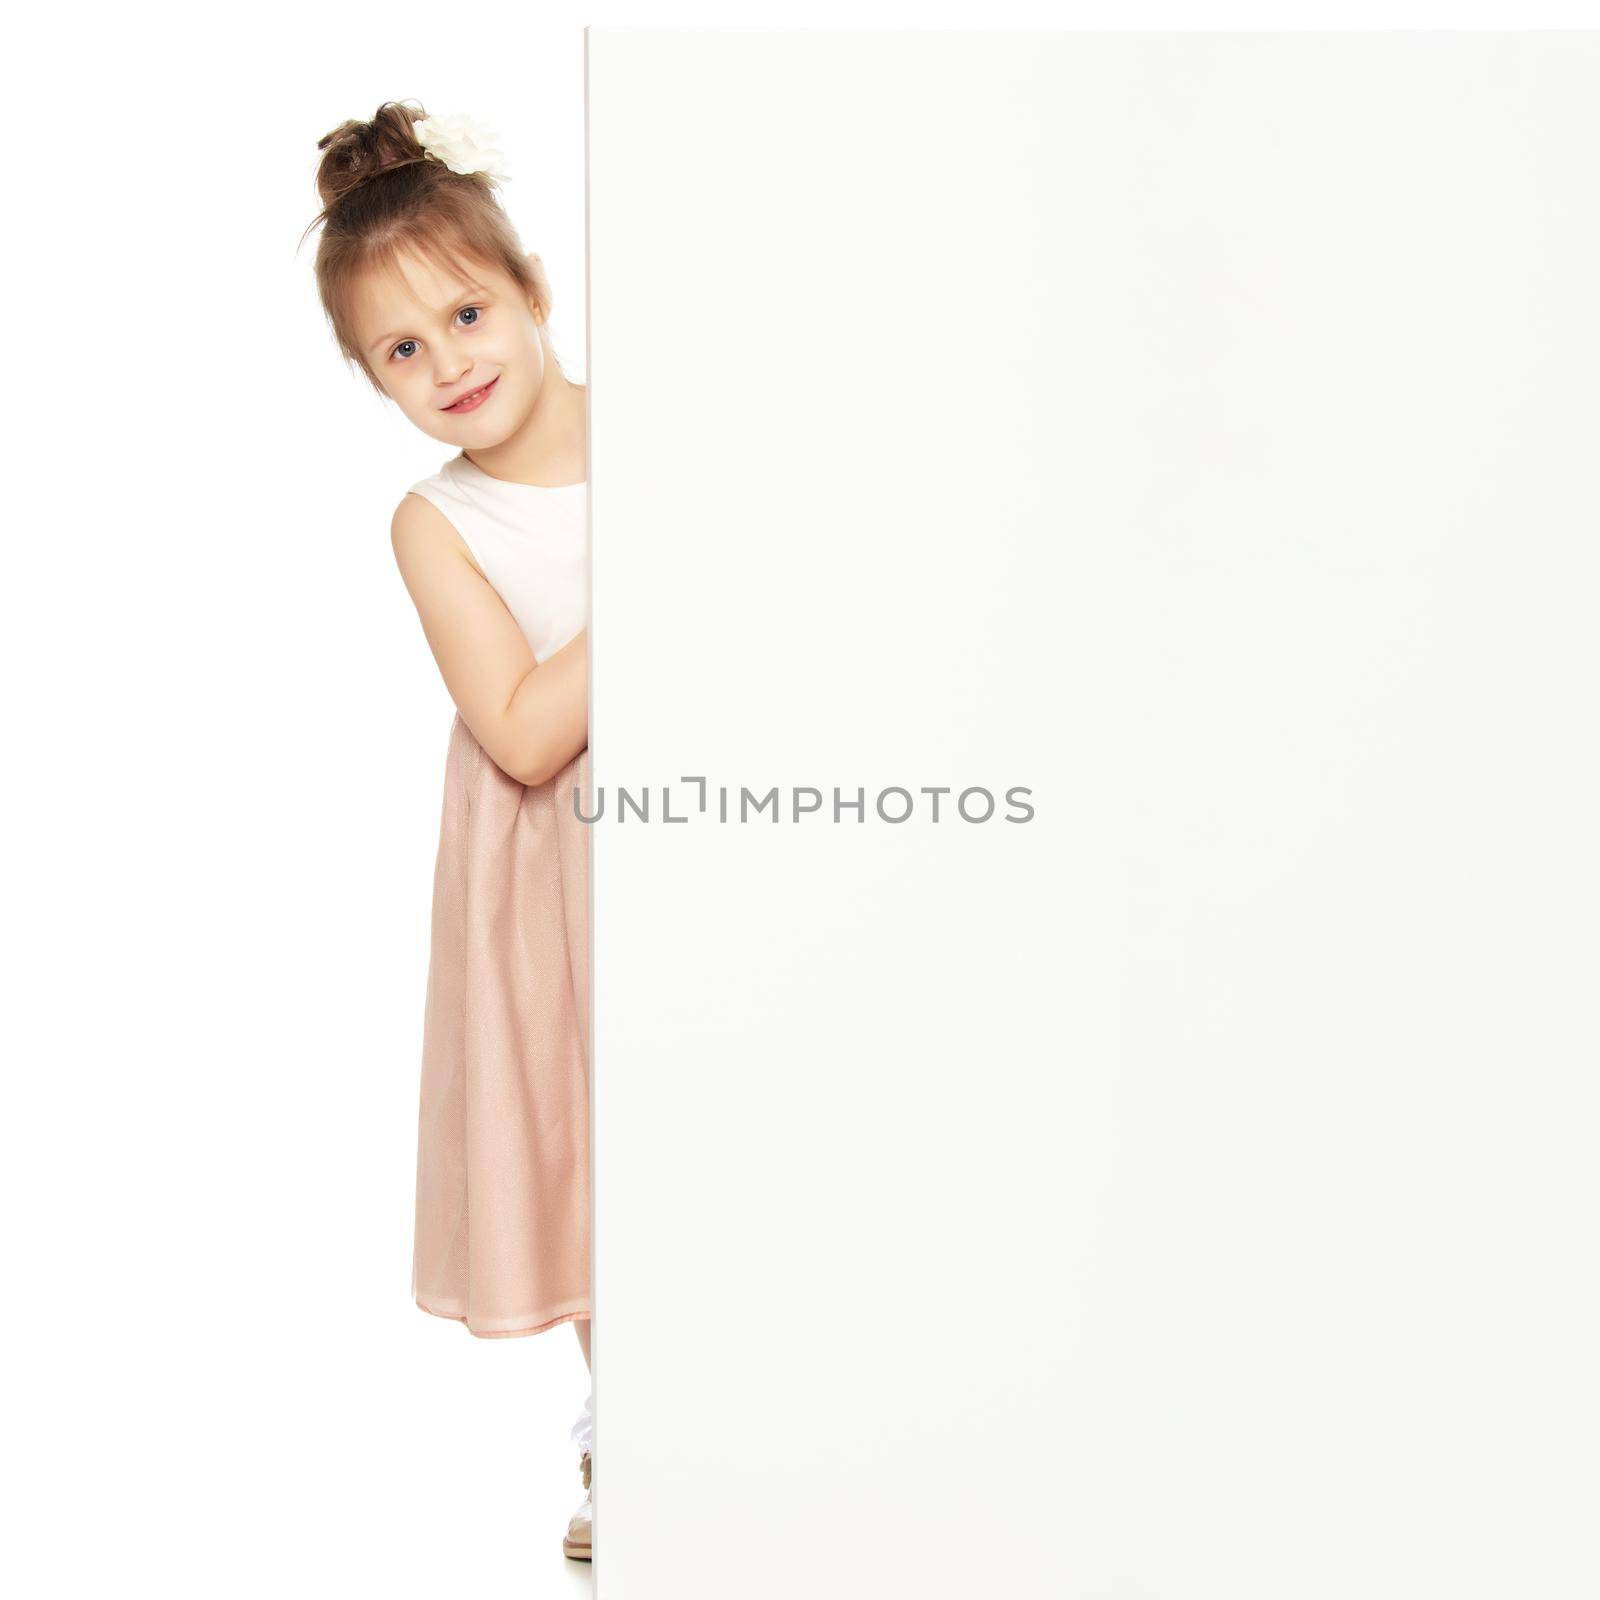 A little girl peeks out from behind the banner. by kolesnikov_studio